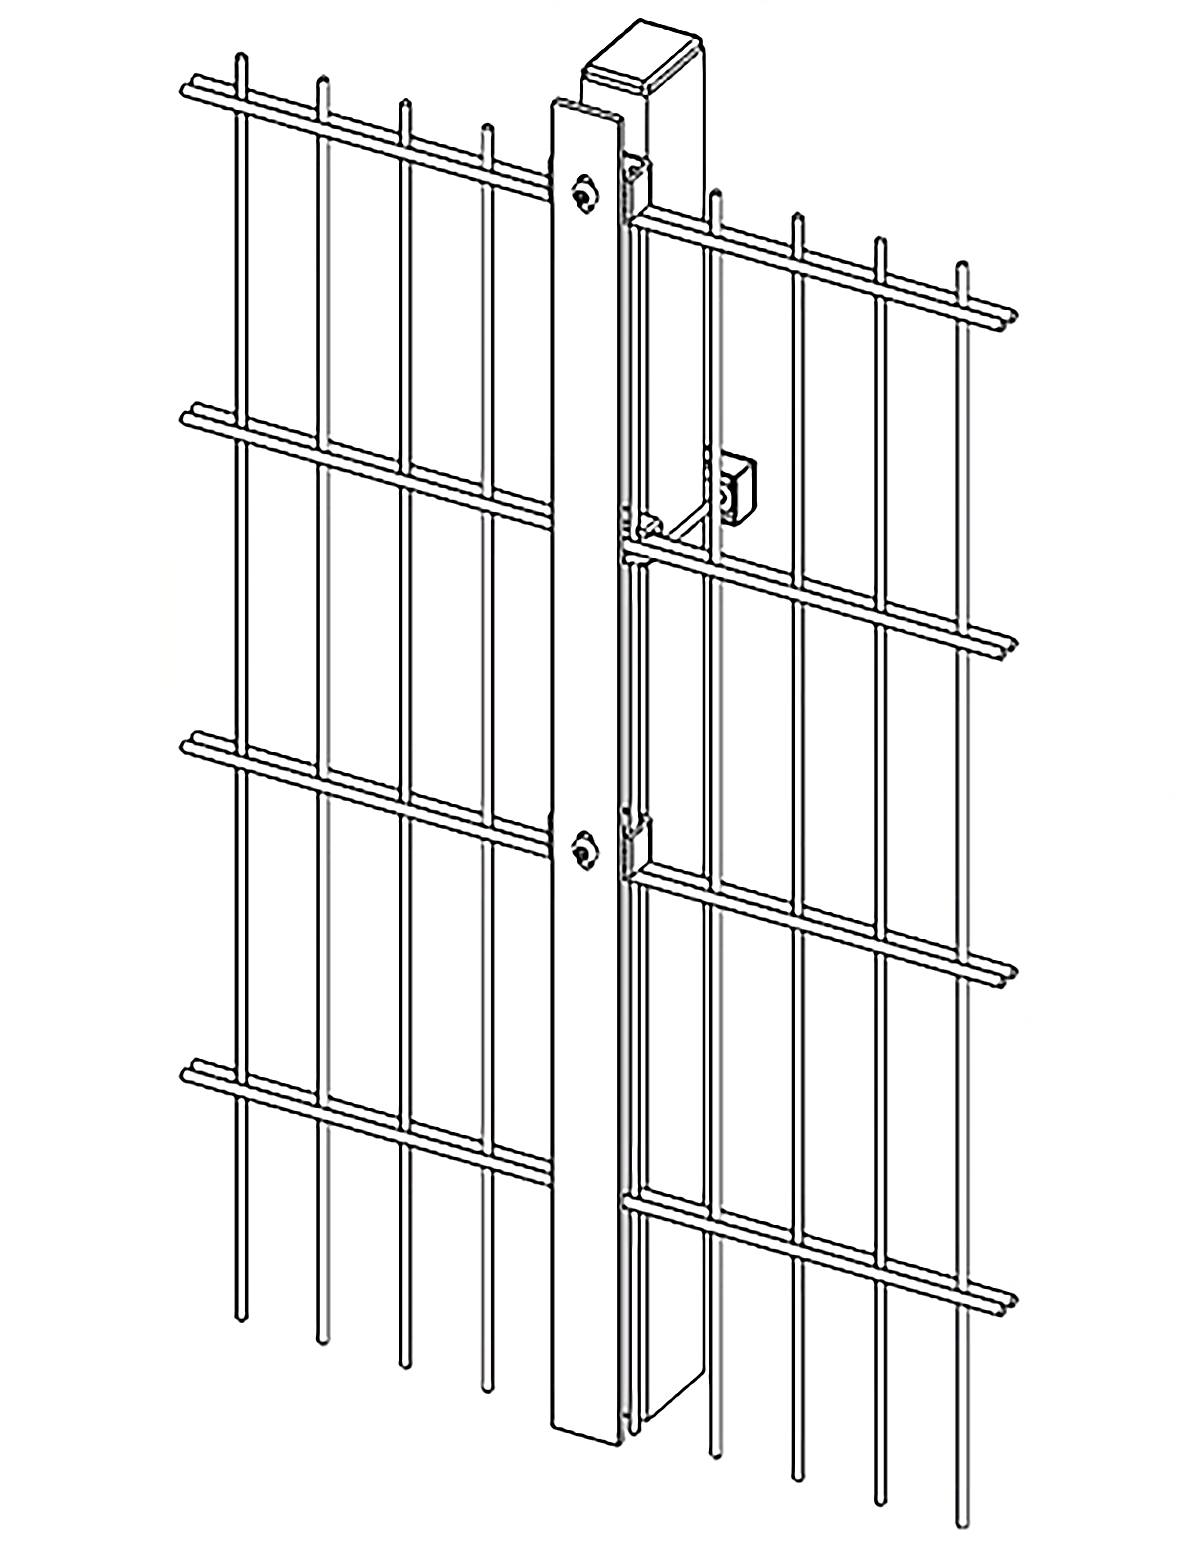 An illustration of the Heras Pallas Xtra Fence